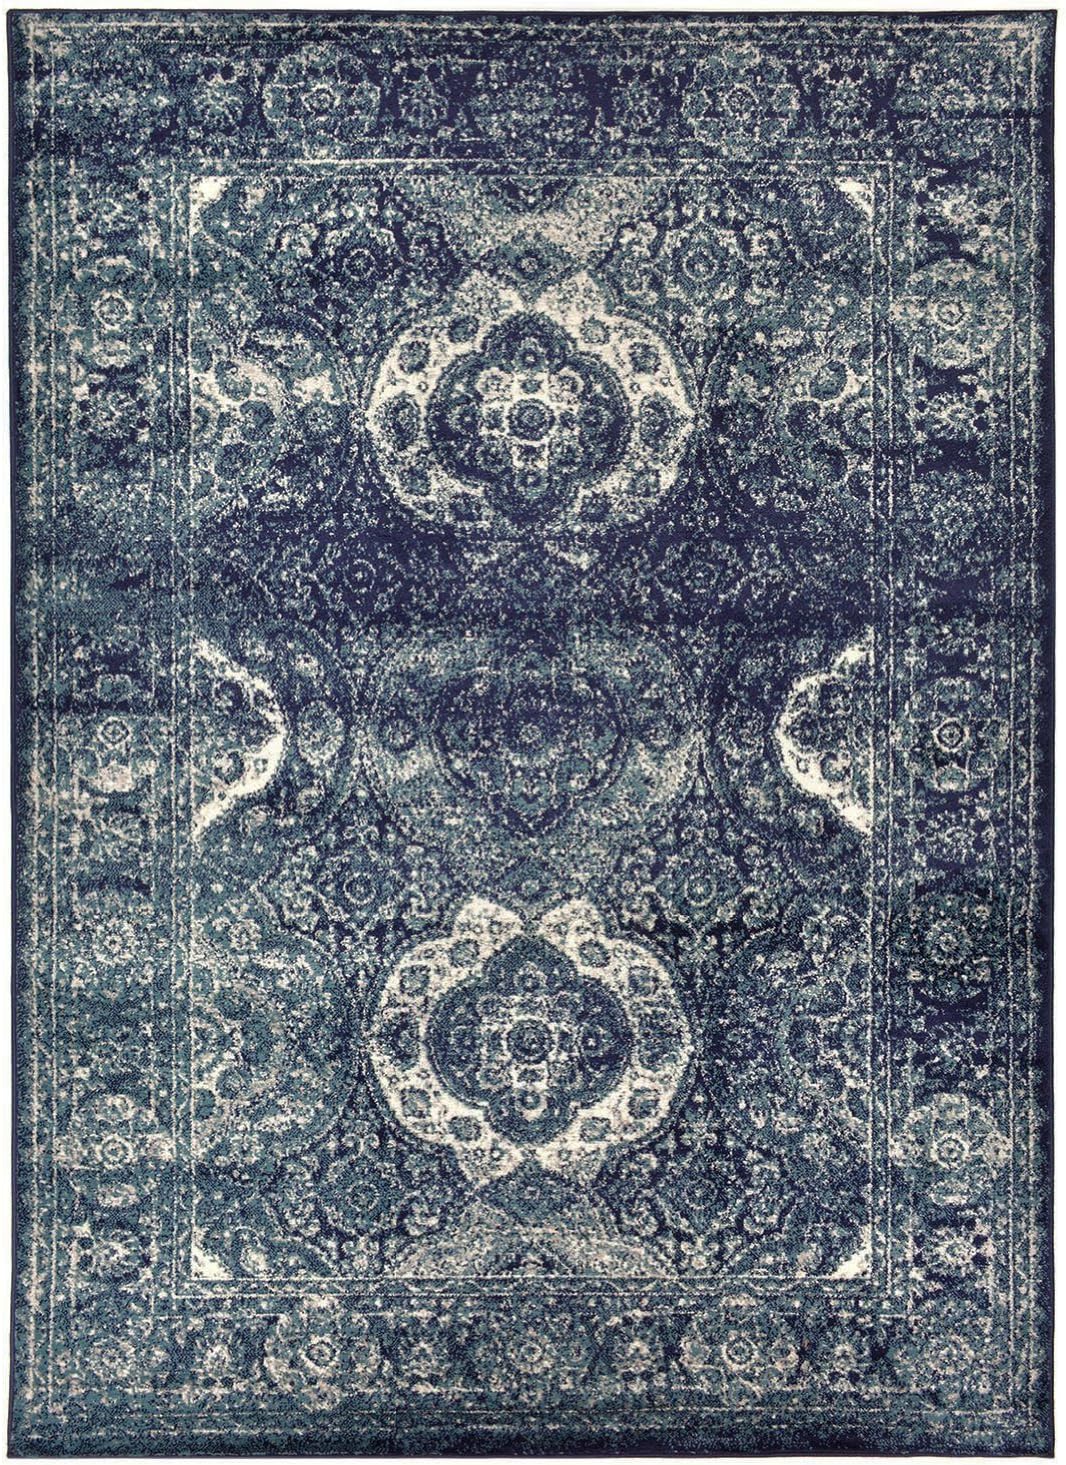 Studio Collection Vintage French Aubusson Design Contemporary Modern Area Rug (Aubusson Navy Blue, 5 x 7)